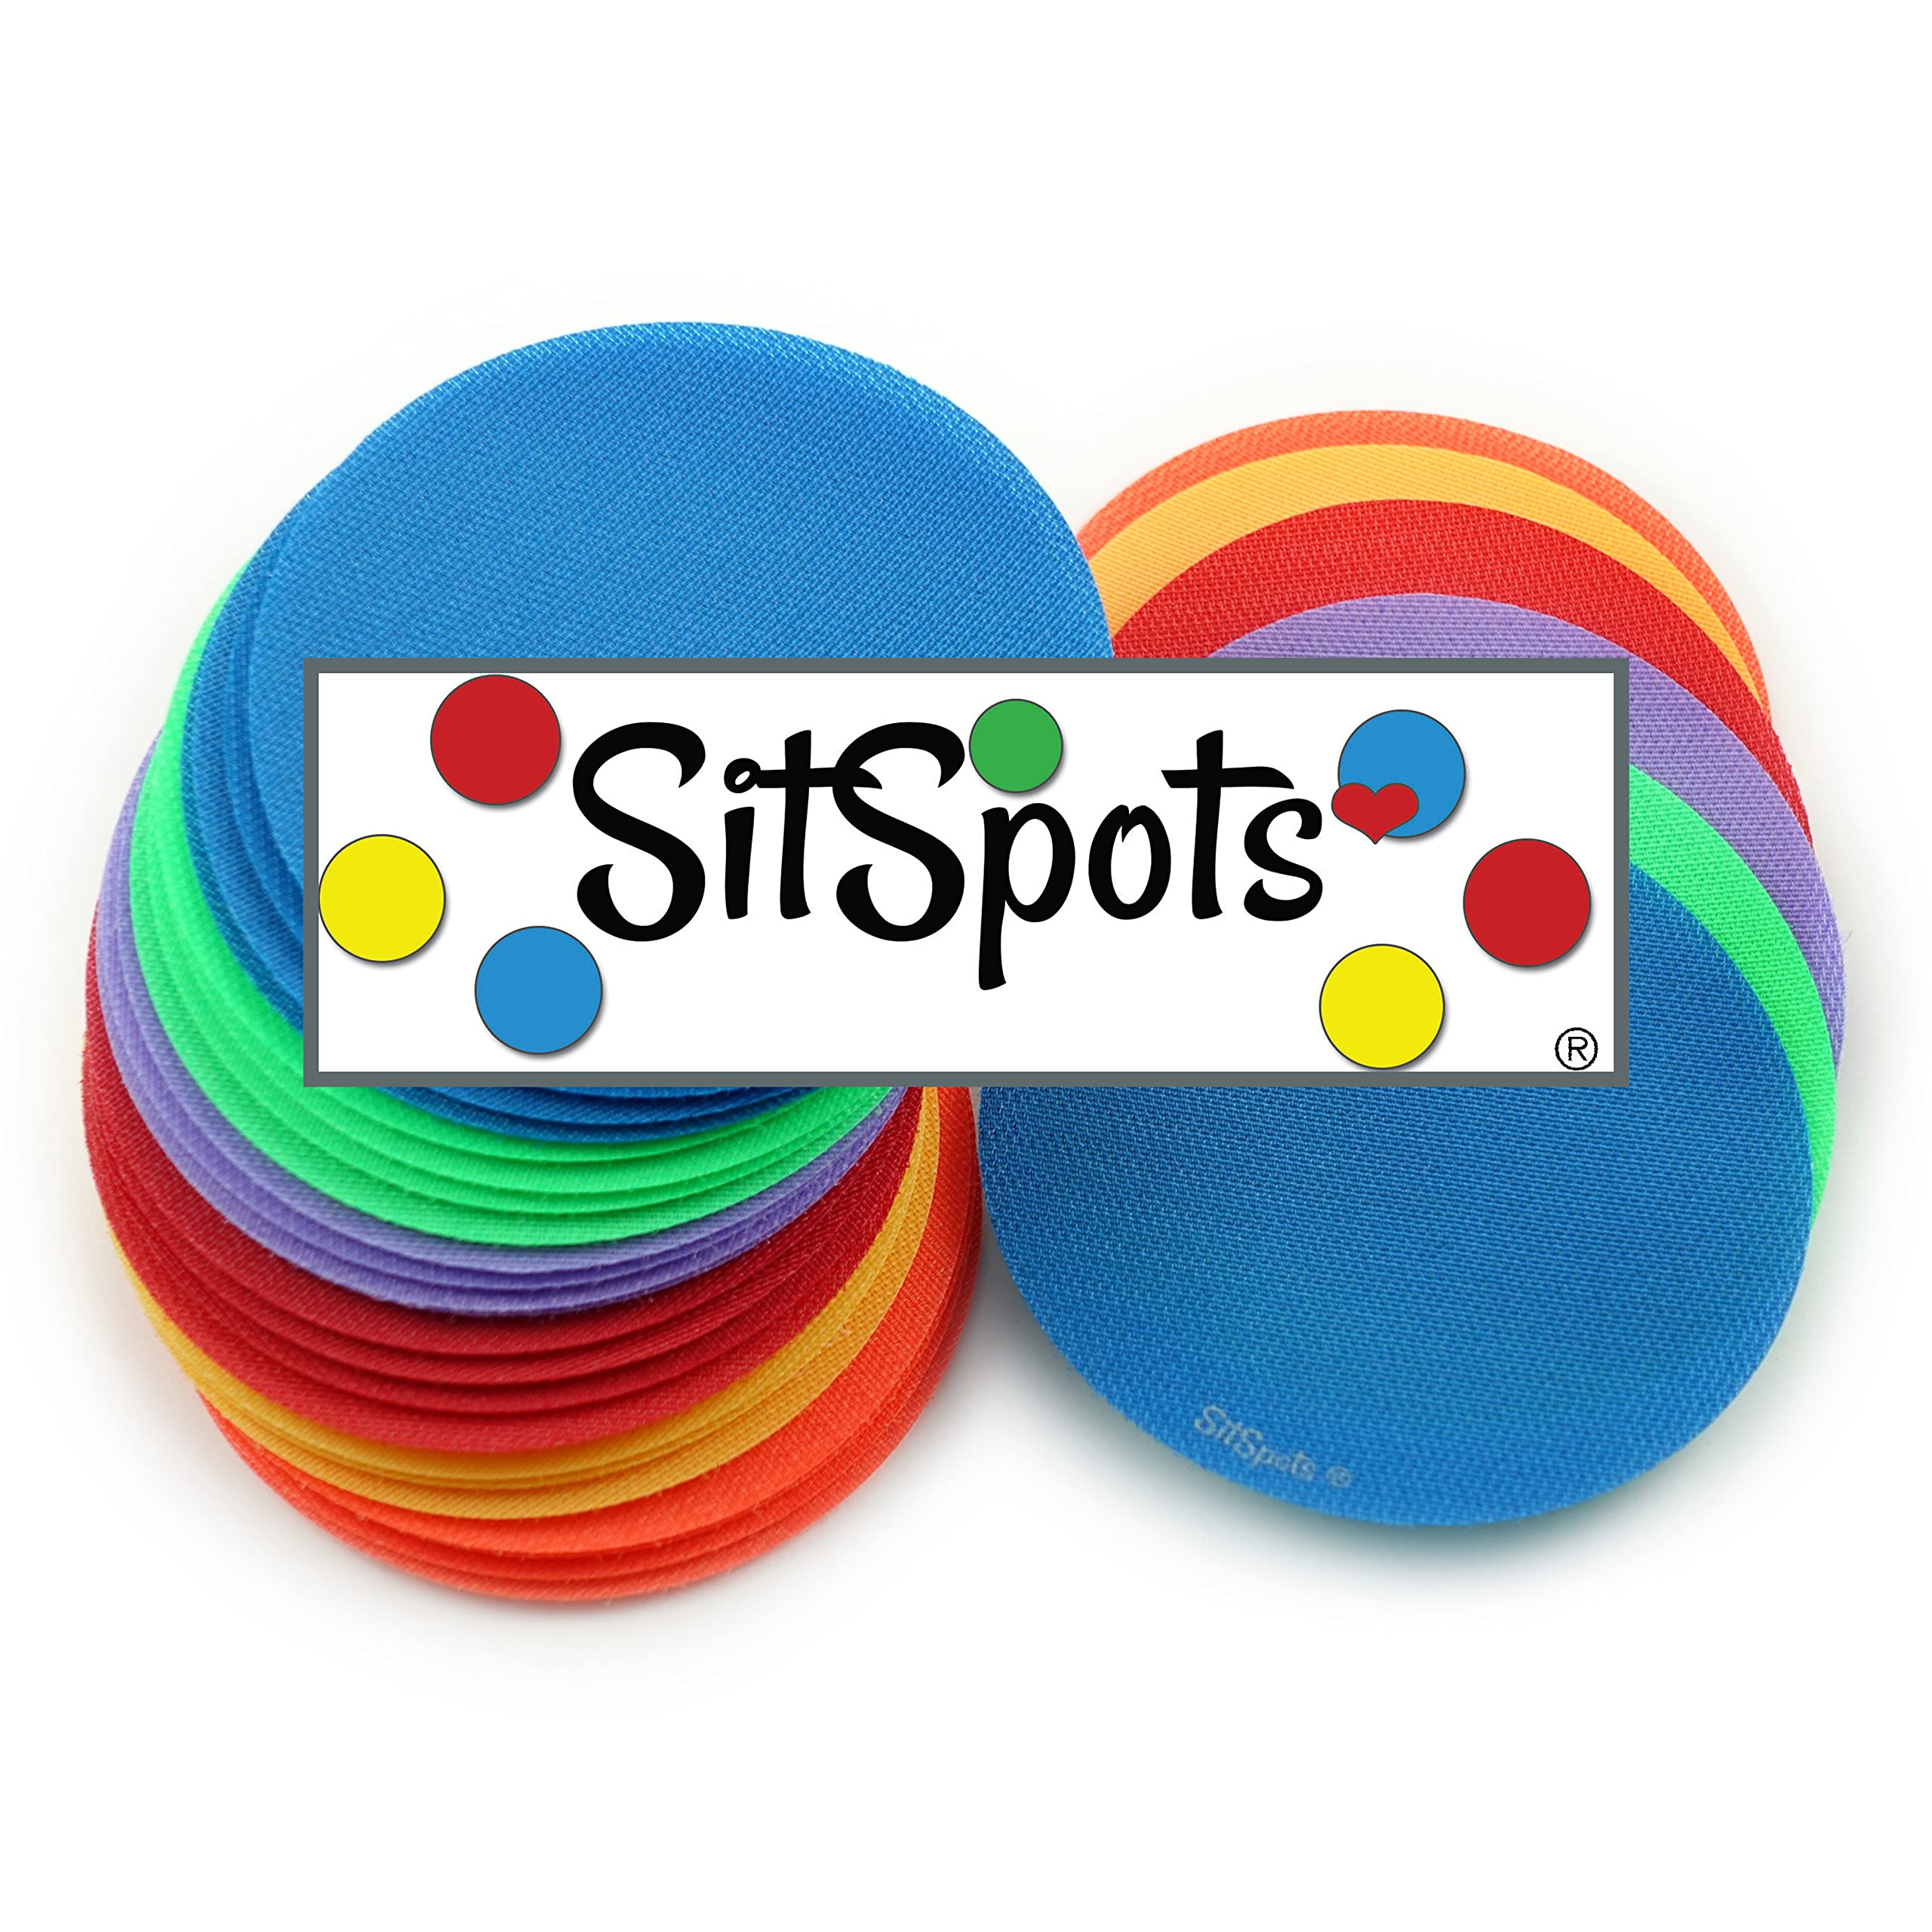 Book Cover SitSpots® Original Circle Packs - Classroom Circle Floor Dots | The Original Sit Spots for Your Classroom Seating, Organizing and Managing Your Students (4